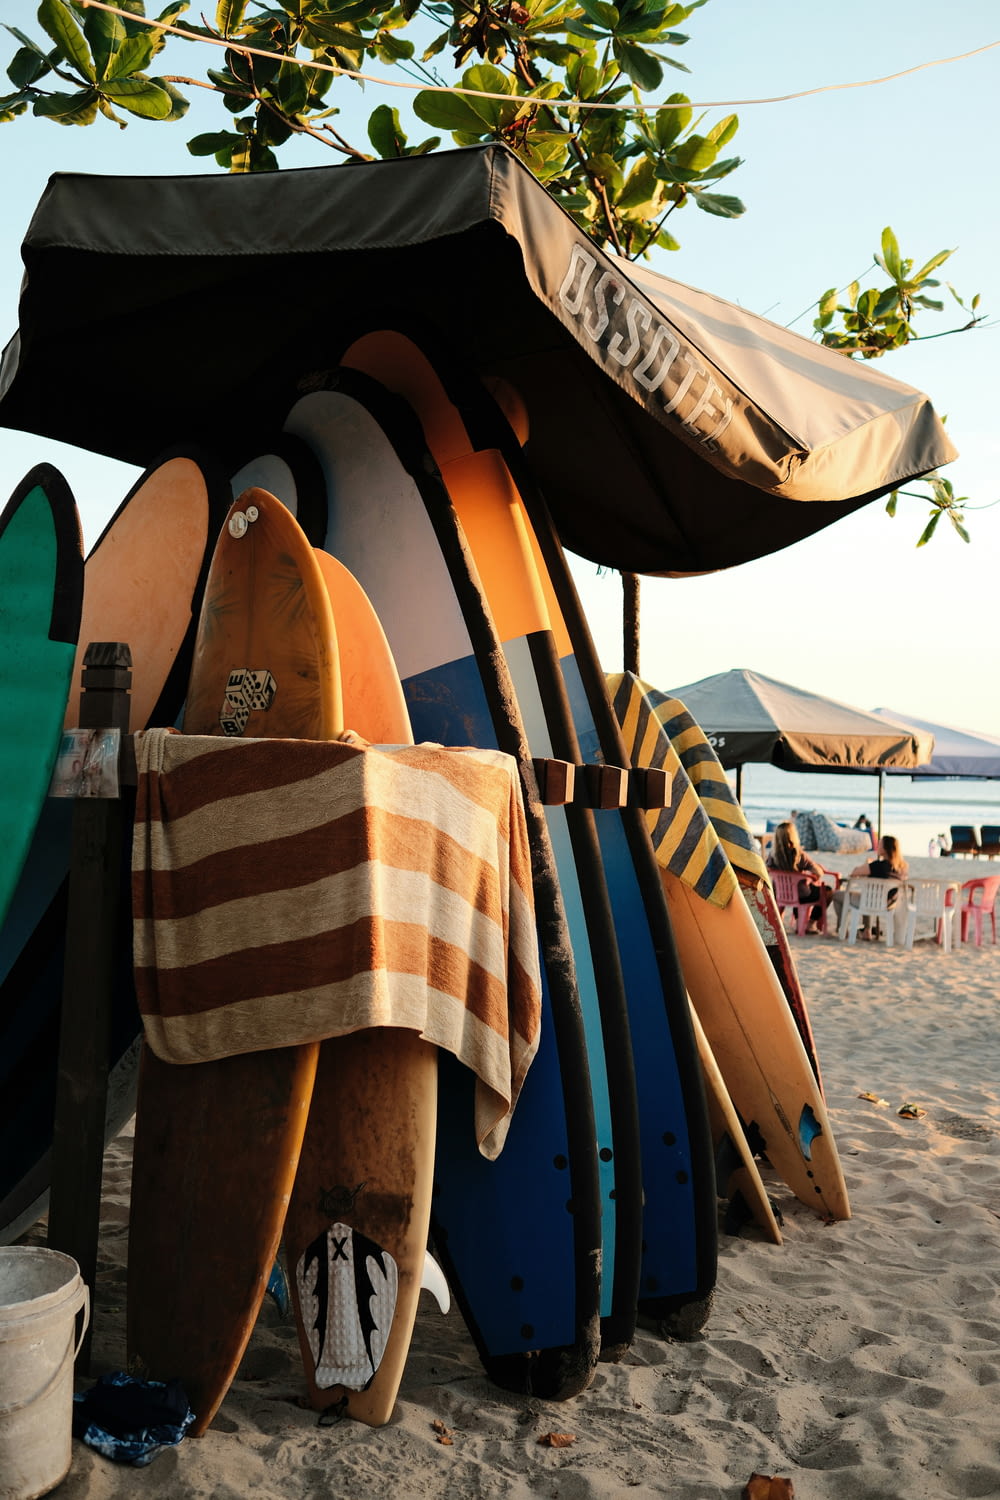 a bunch of surfboards are lined up on the beach